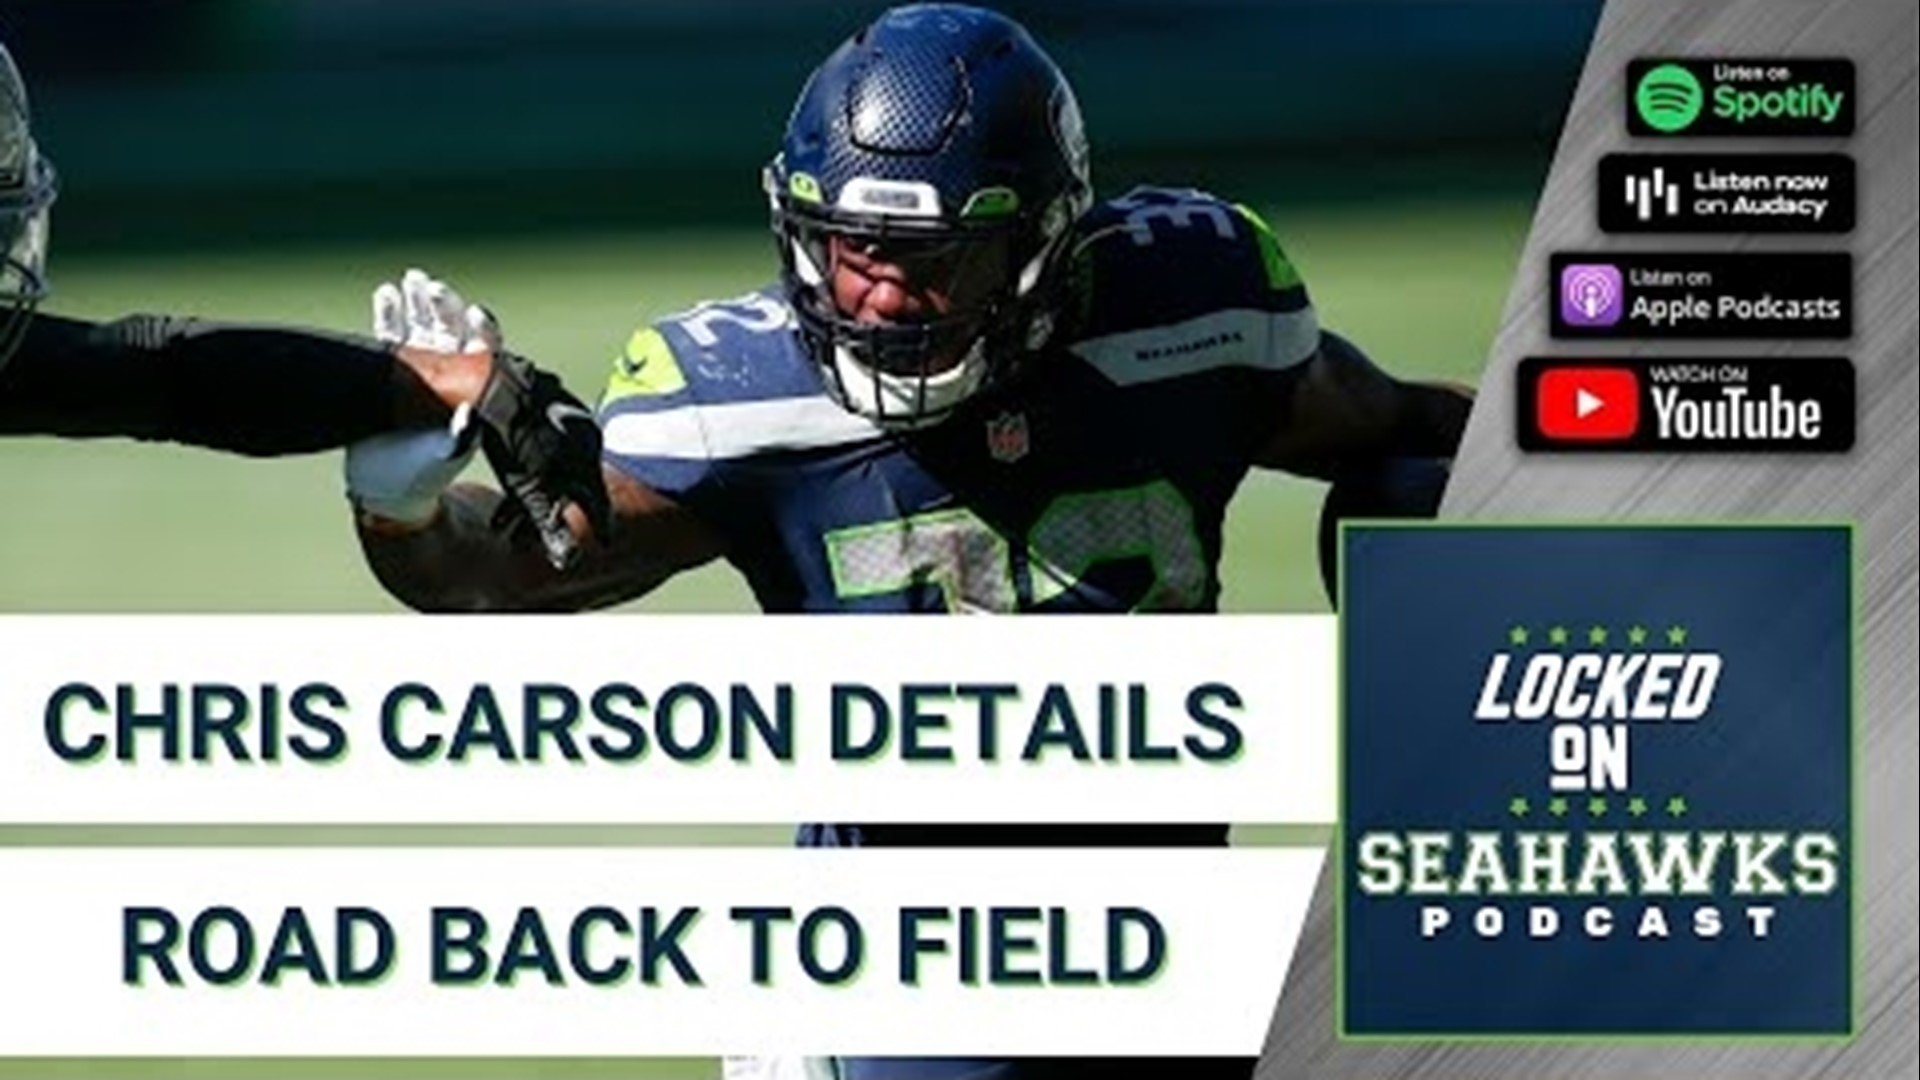 Chris Carson's health has been one of the biggest story-lines for the Seahawks as the bruising running back attempts to come back from cervical fusion surgery.